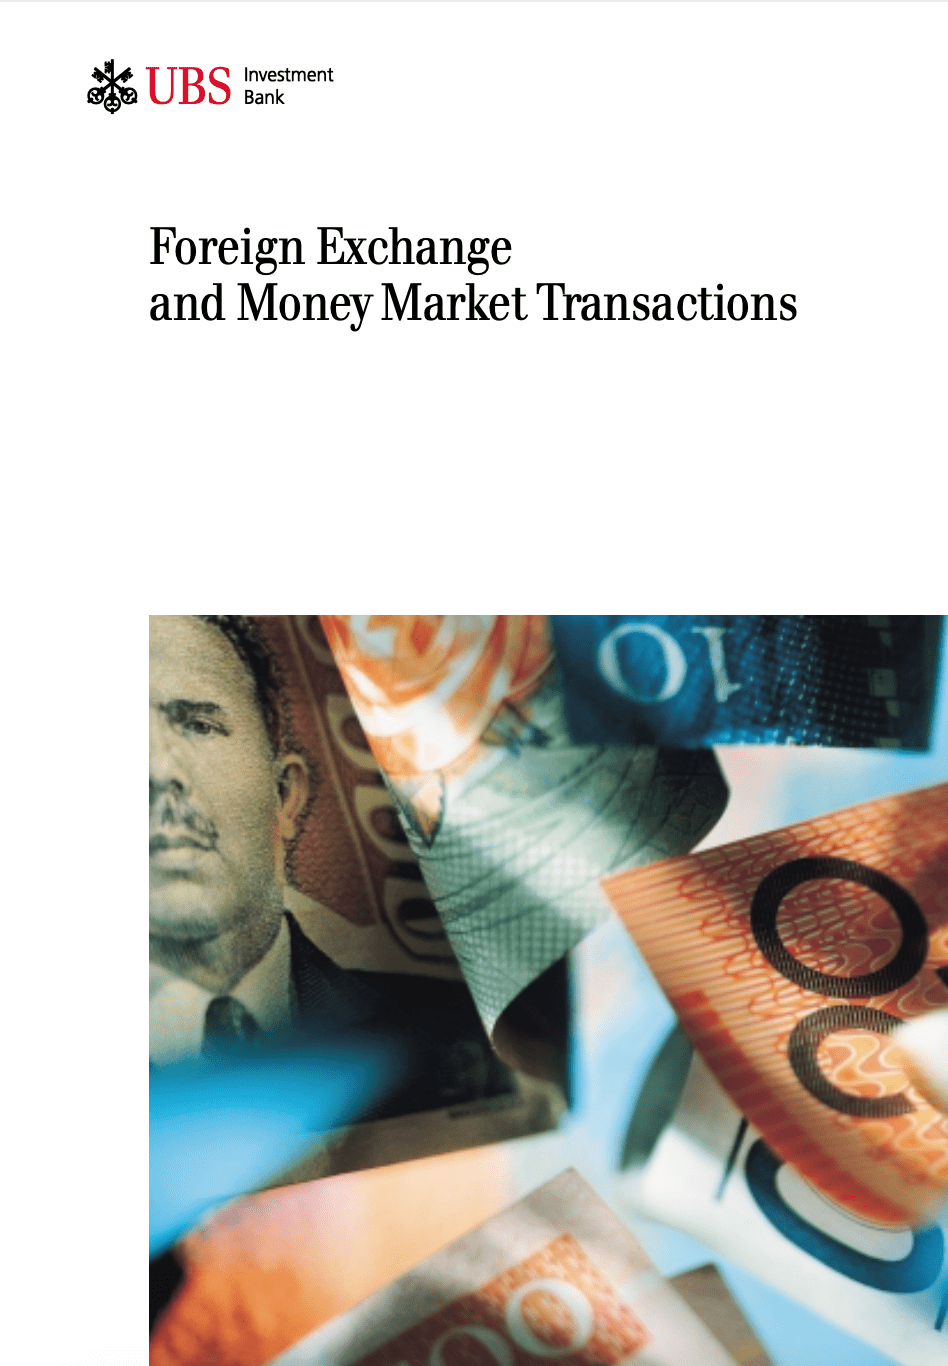 Foreign Exchange and Money Market Transactions read online at BusinessBooks.cc